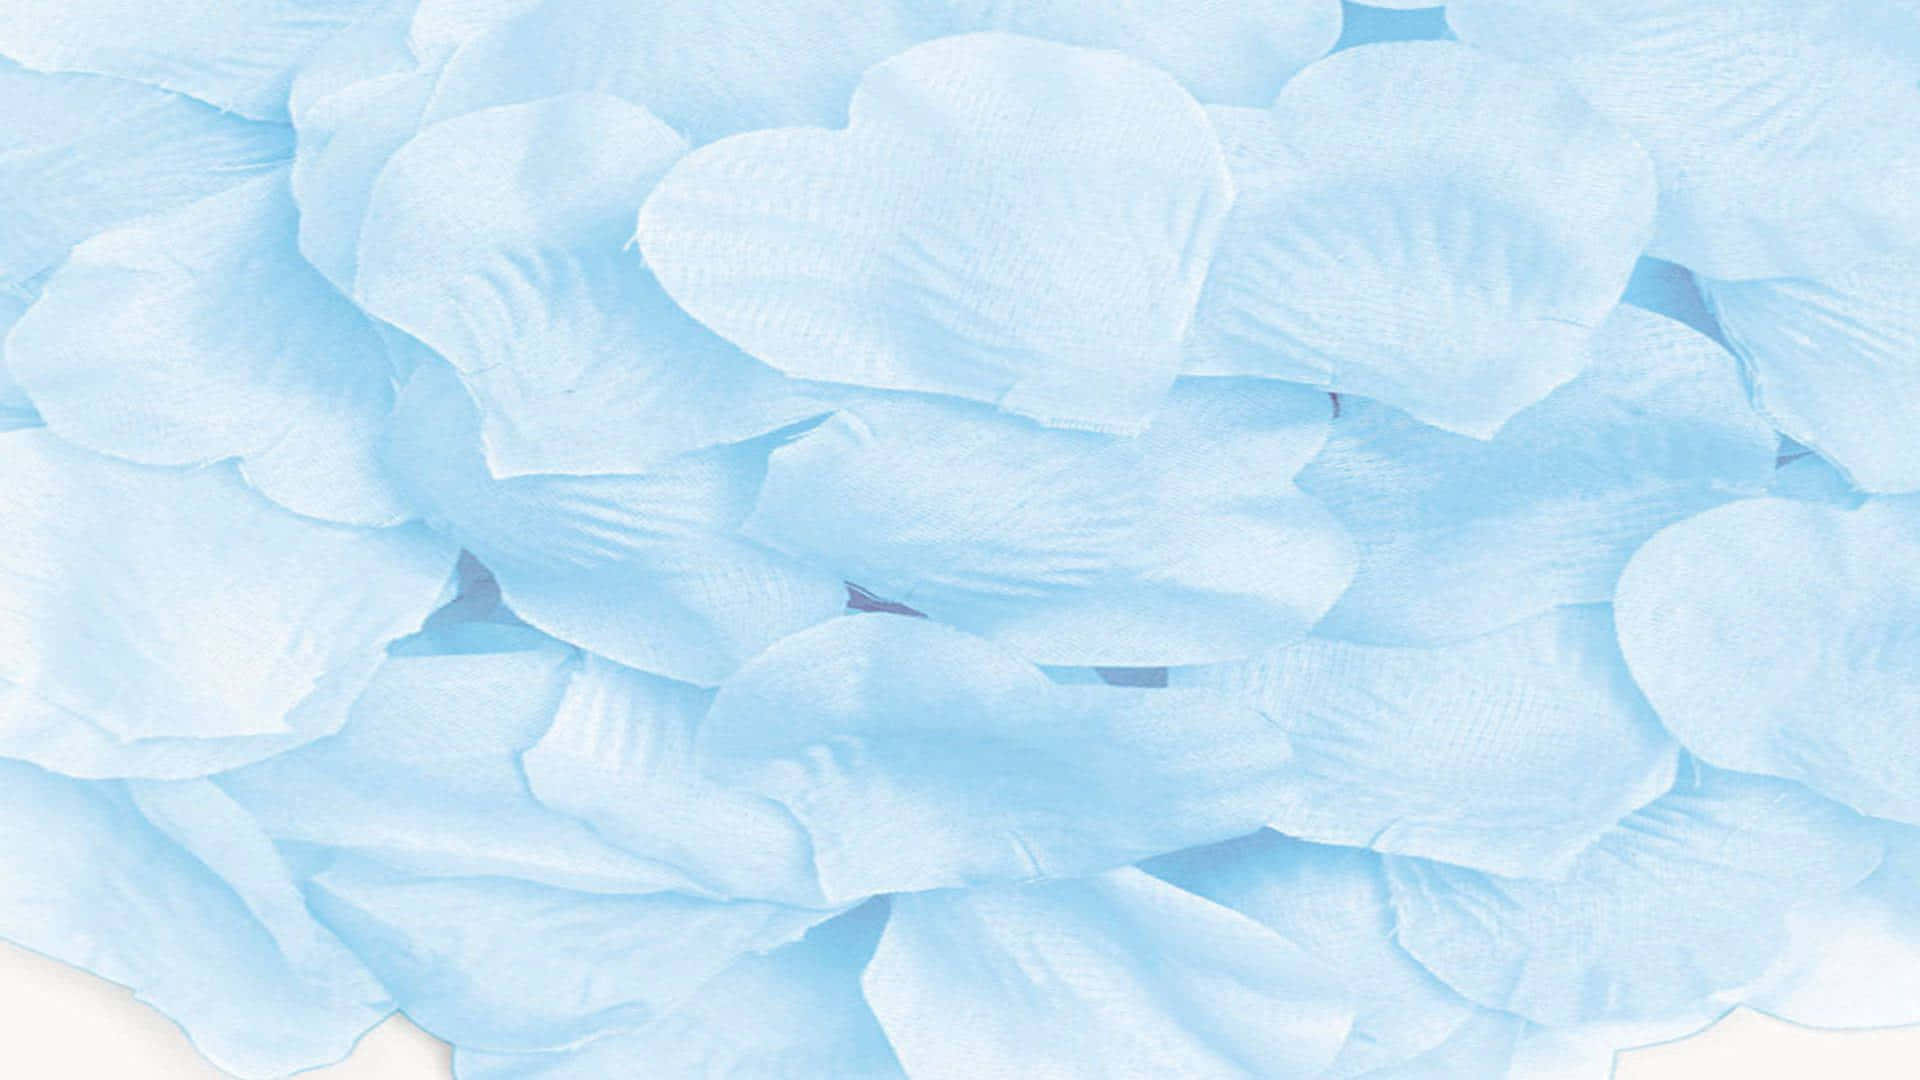 A Pile Of Blue Rose Petals On A White Surface